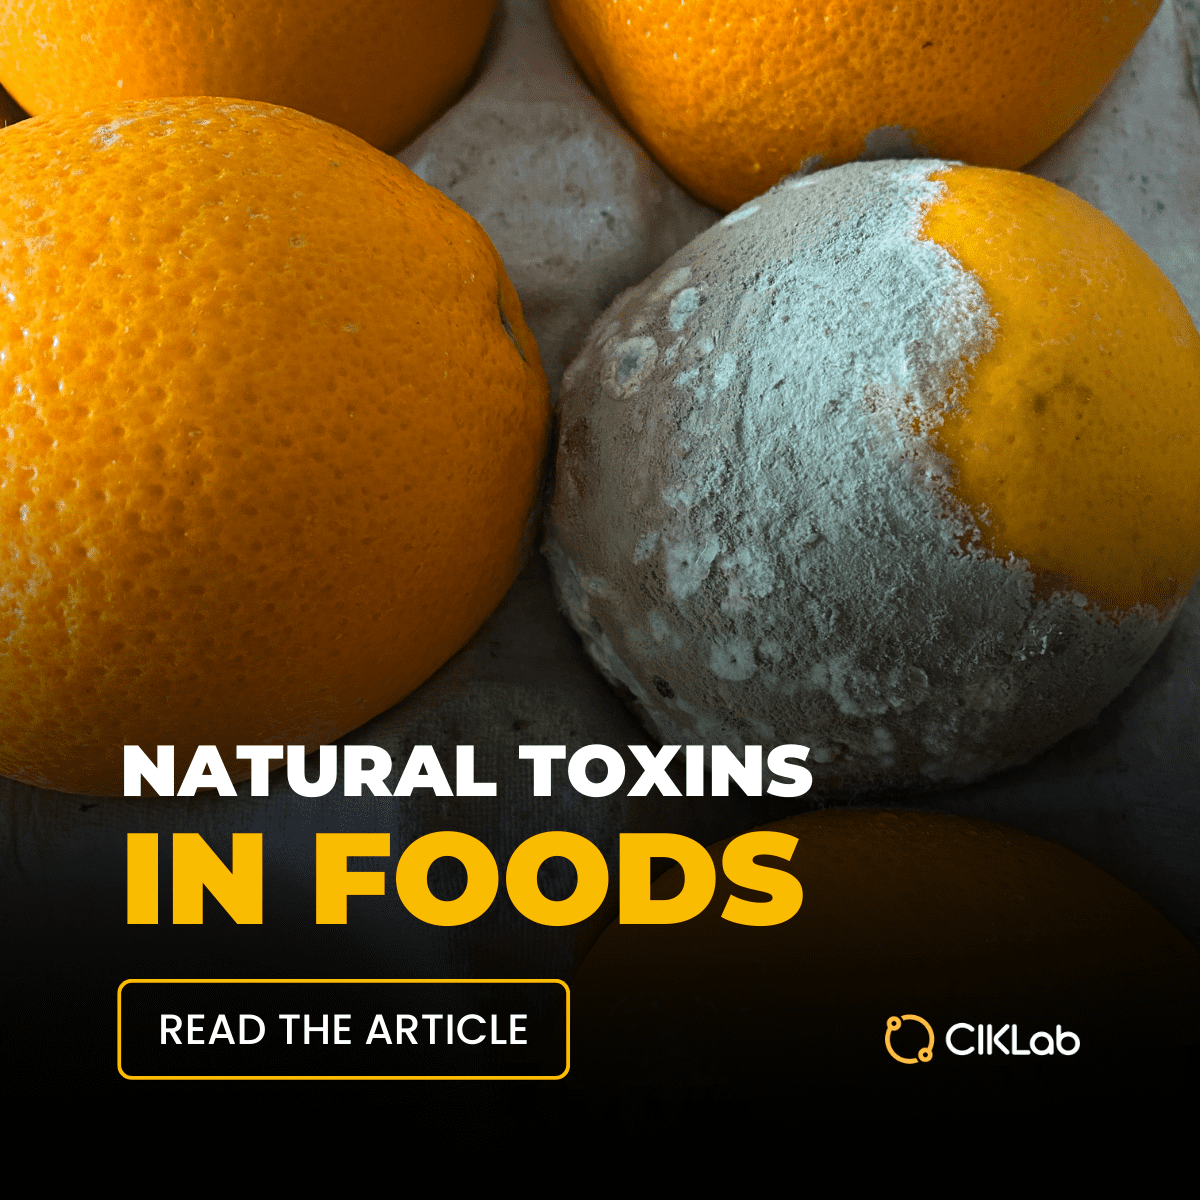 Natural toxins in Foods